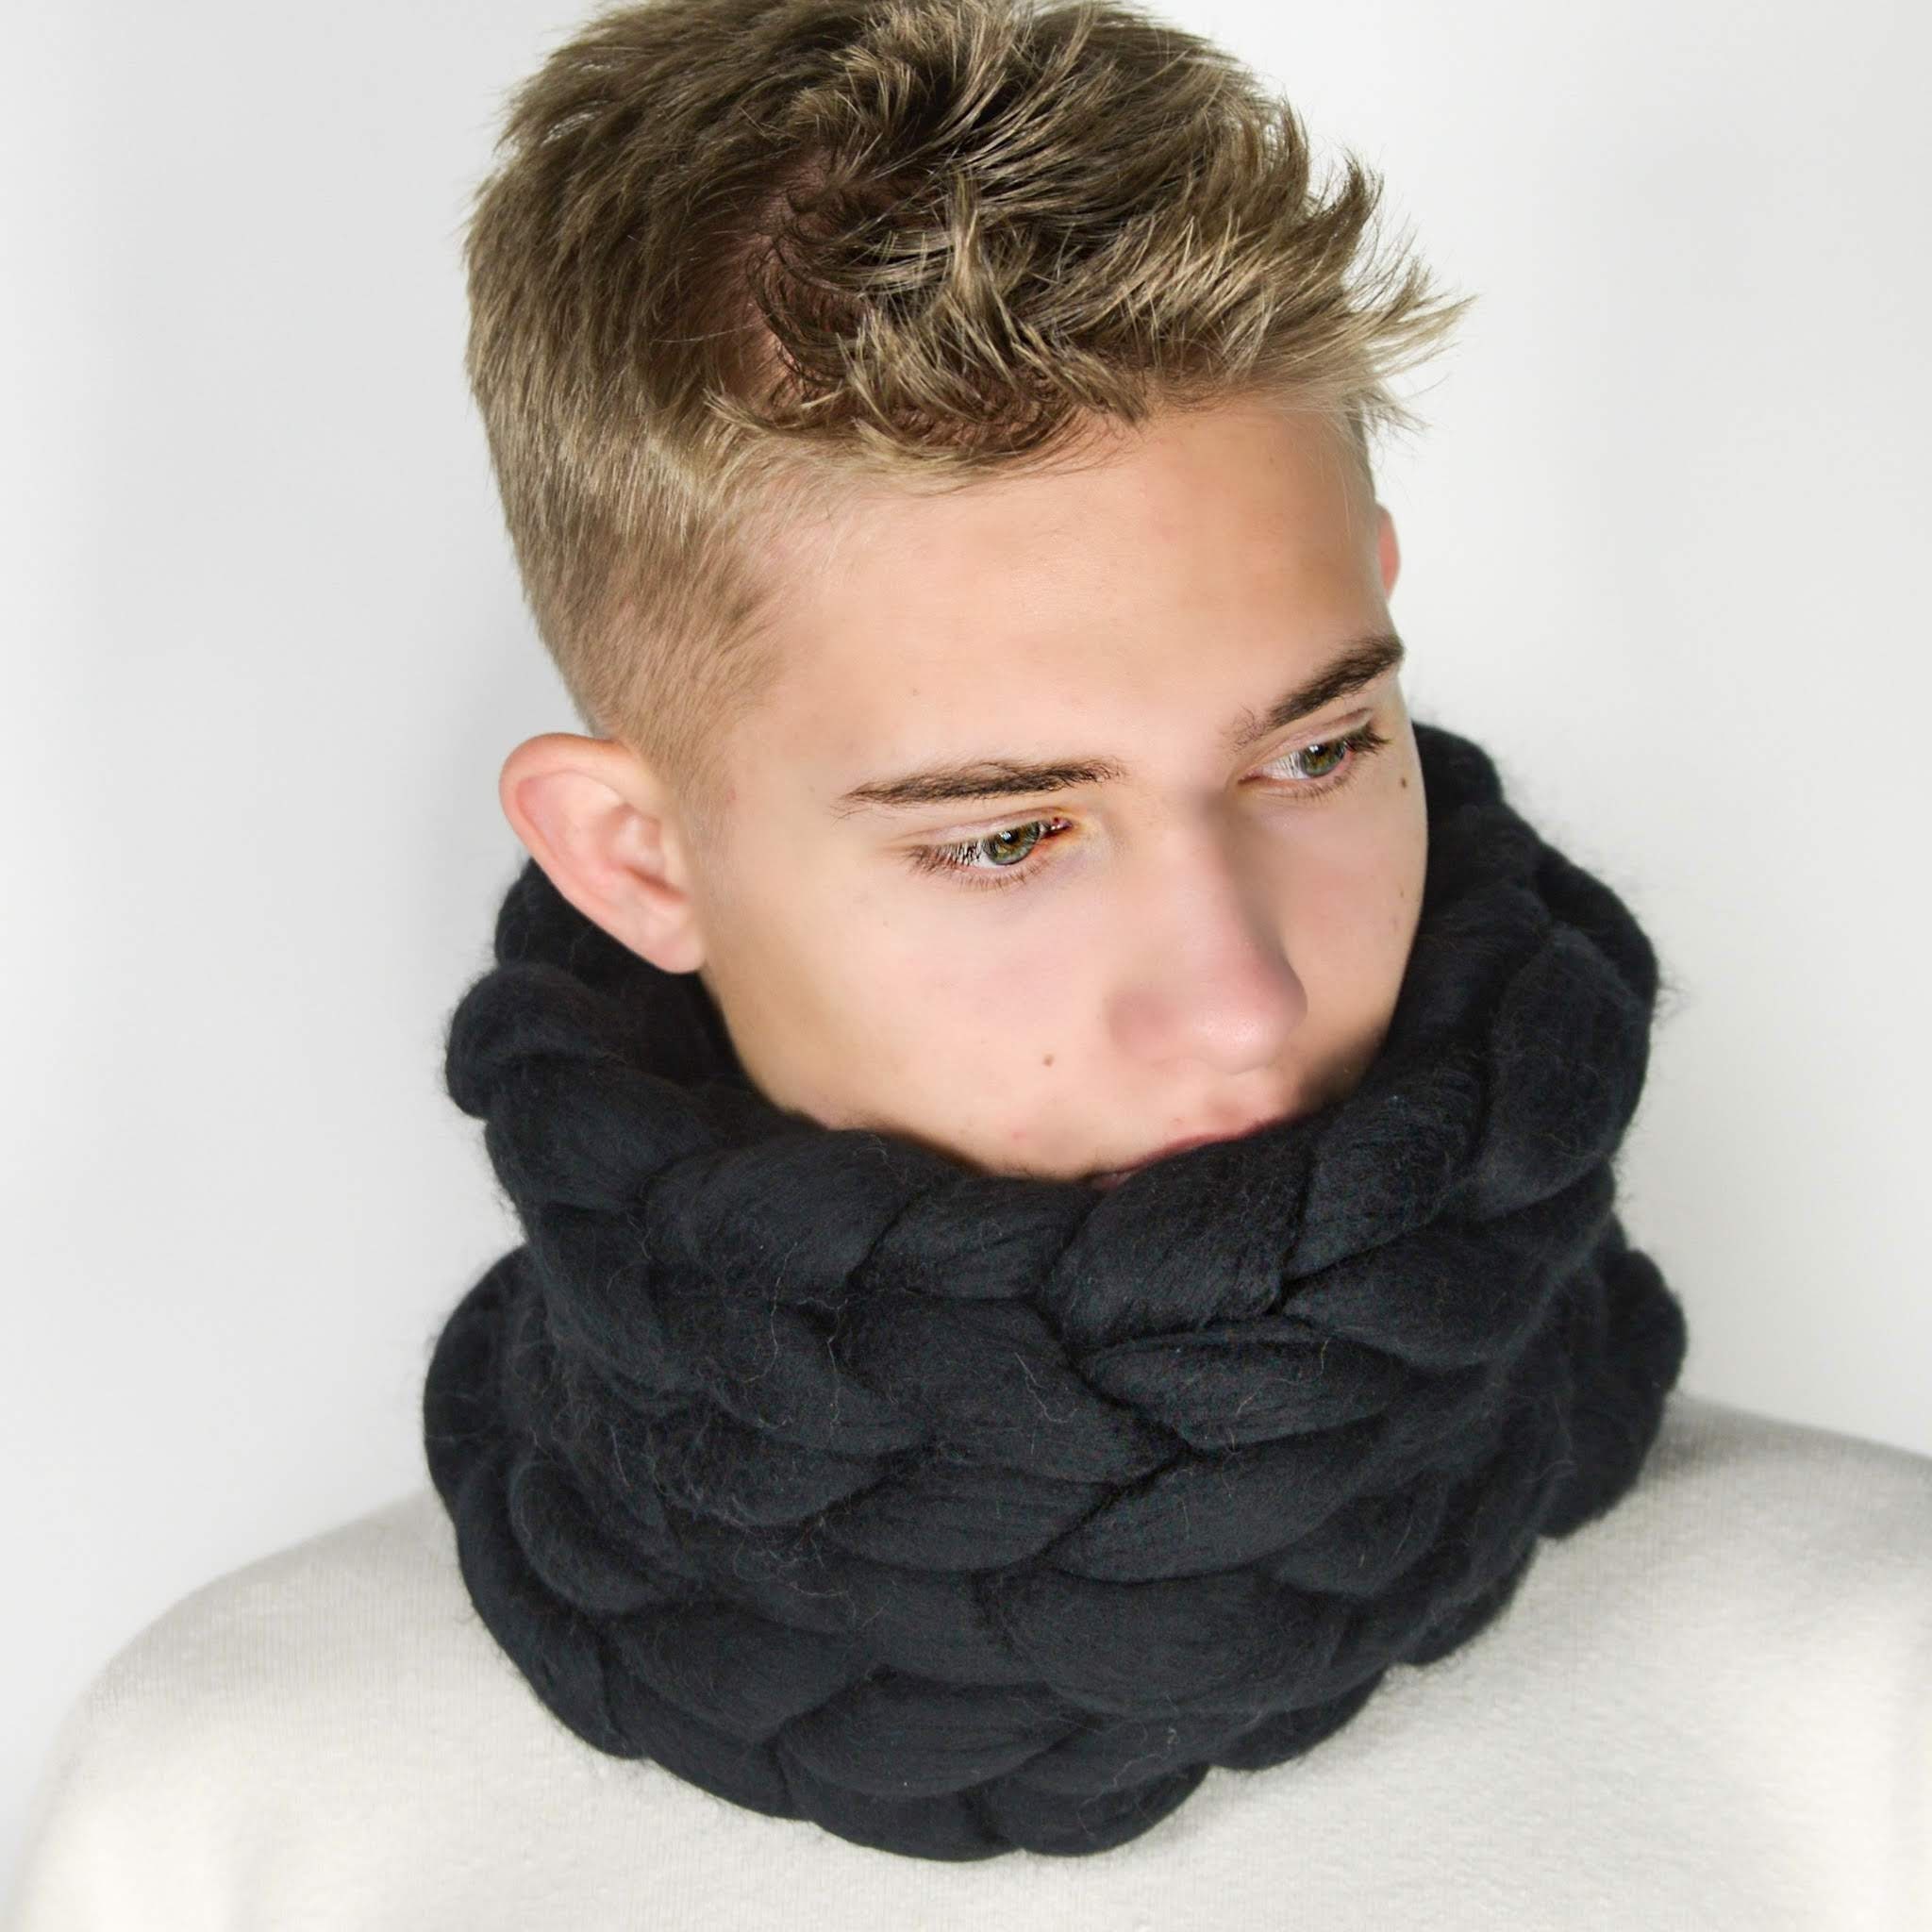 mens Cowl mens cowl scarf mens infinity scarf thick Mens Scarf, gift for men Mens Scarf knit accessories valentines day gift